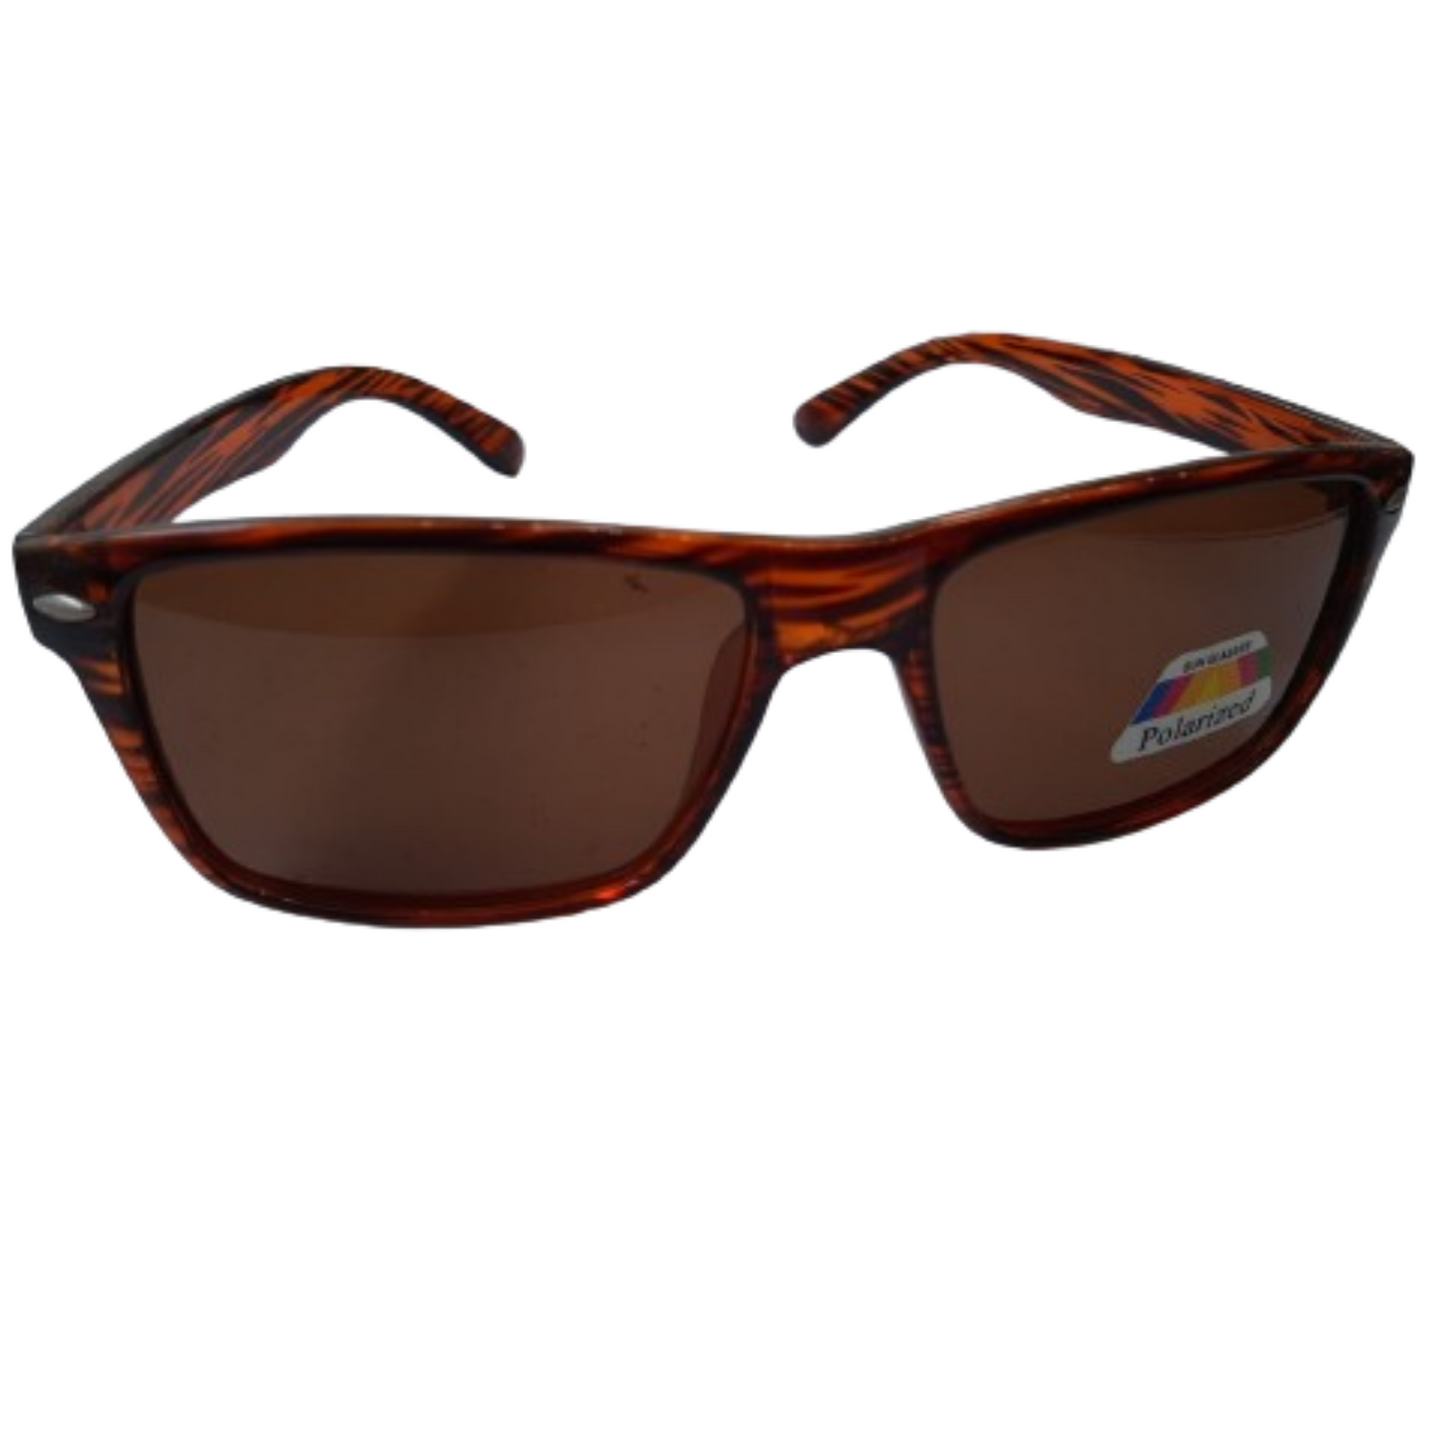 Vintage Brown Sunglasses for Women